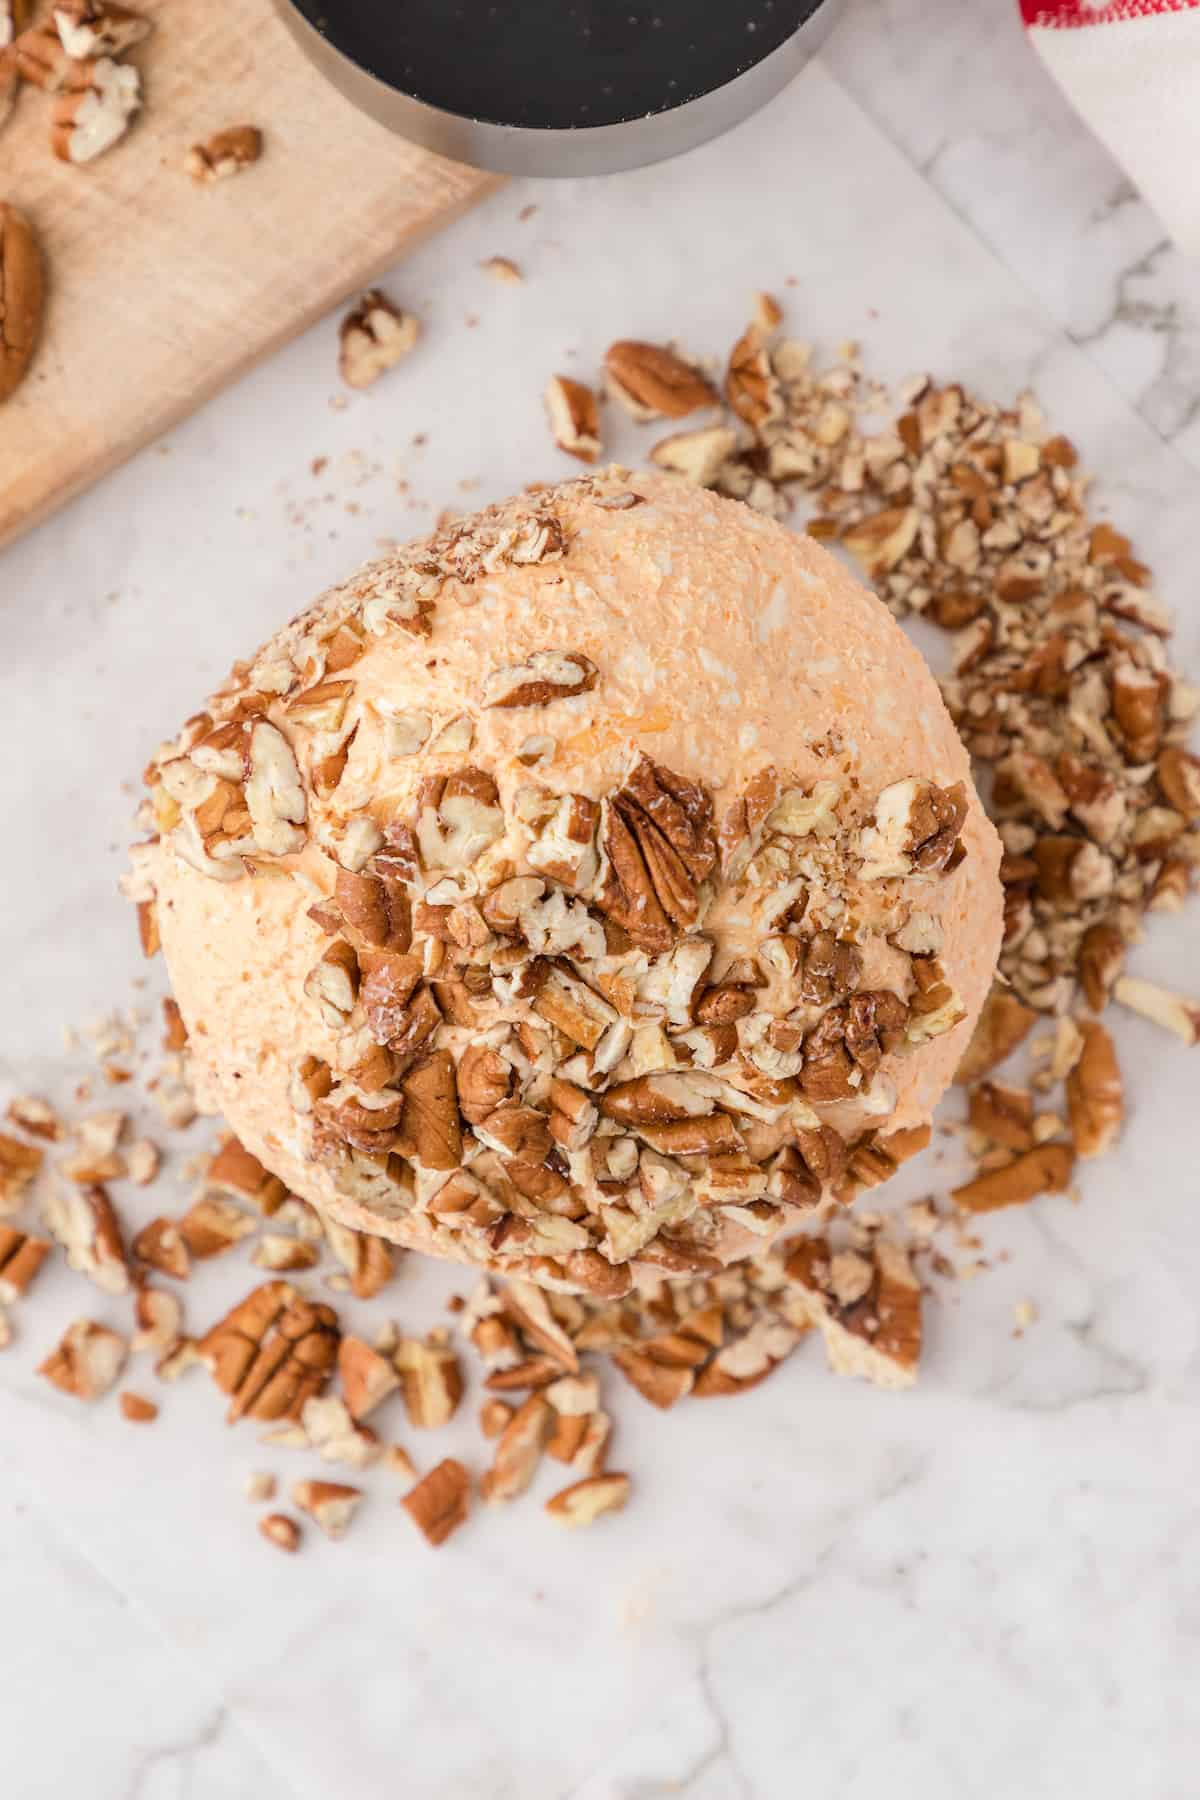 press chopped pecans into the surface of the cheese ball